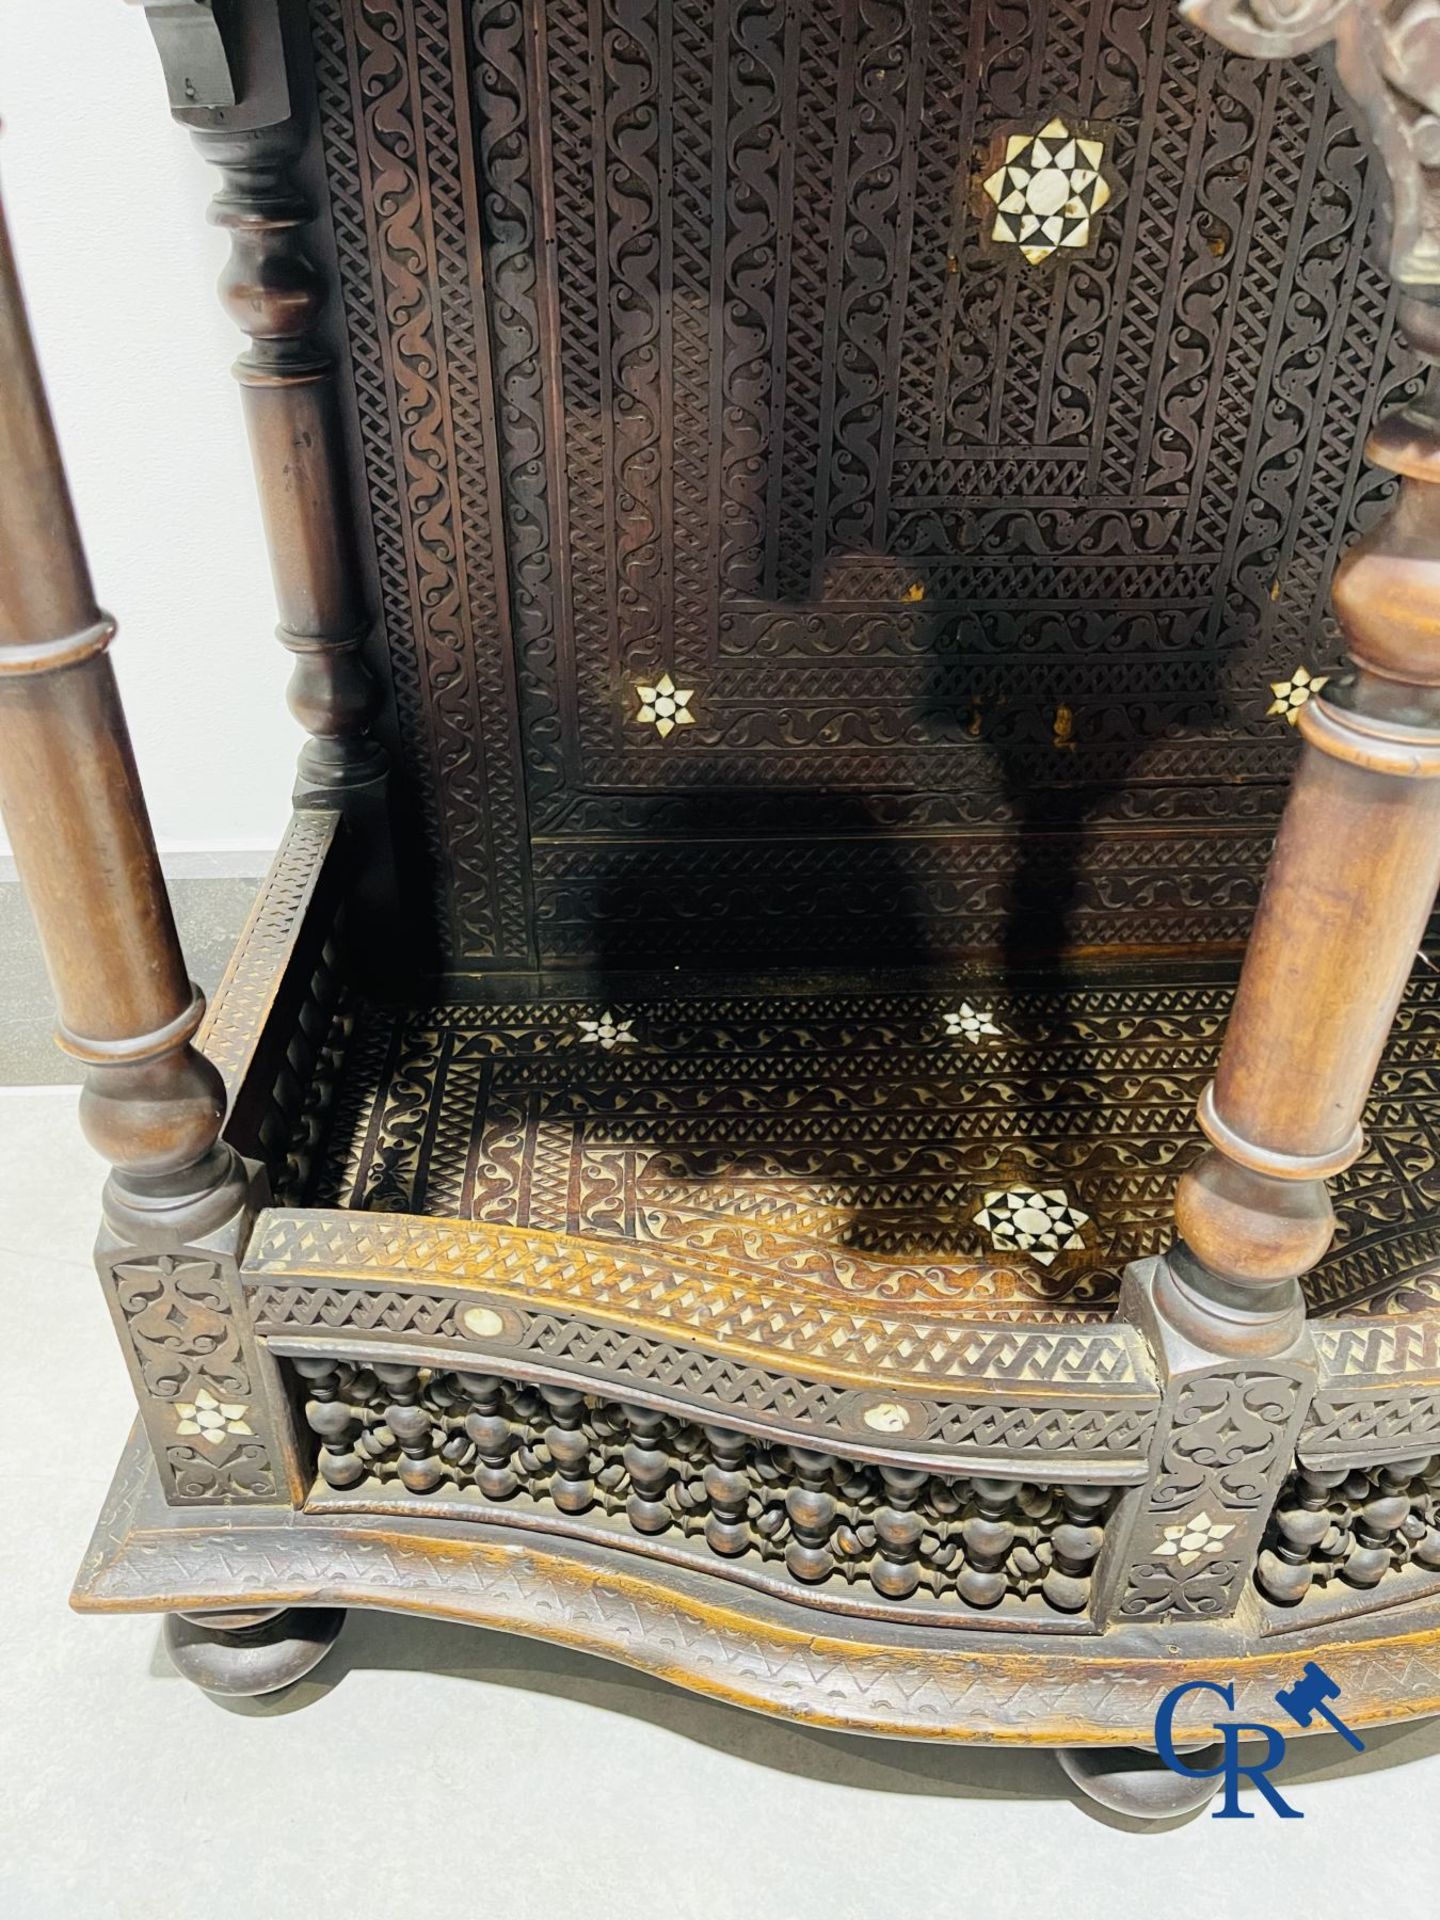 Sculpted furniture with inlays of ebony and mother-of-pearl. Syria, early 19th century. - Image 15 of 22